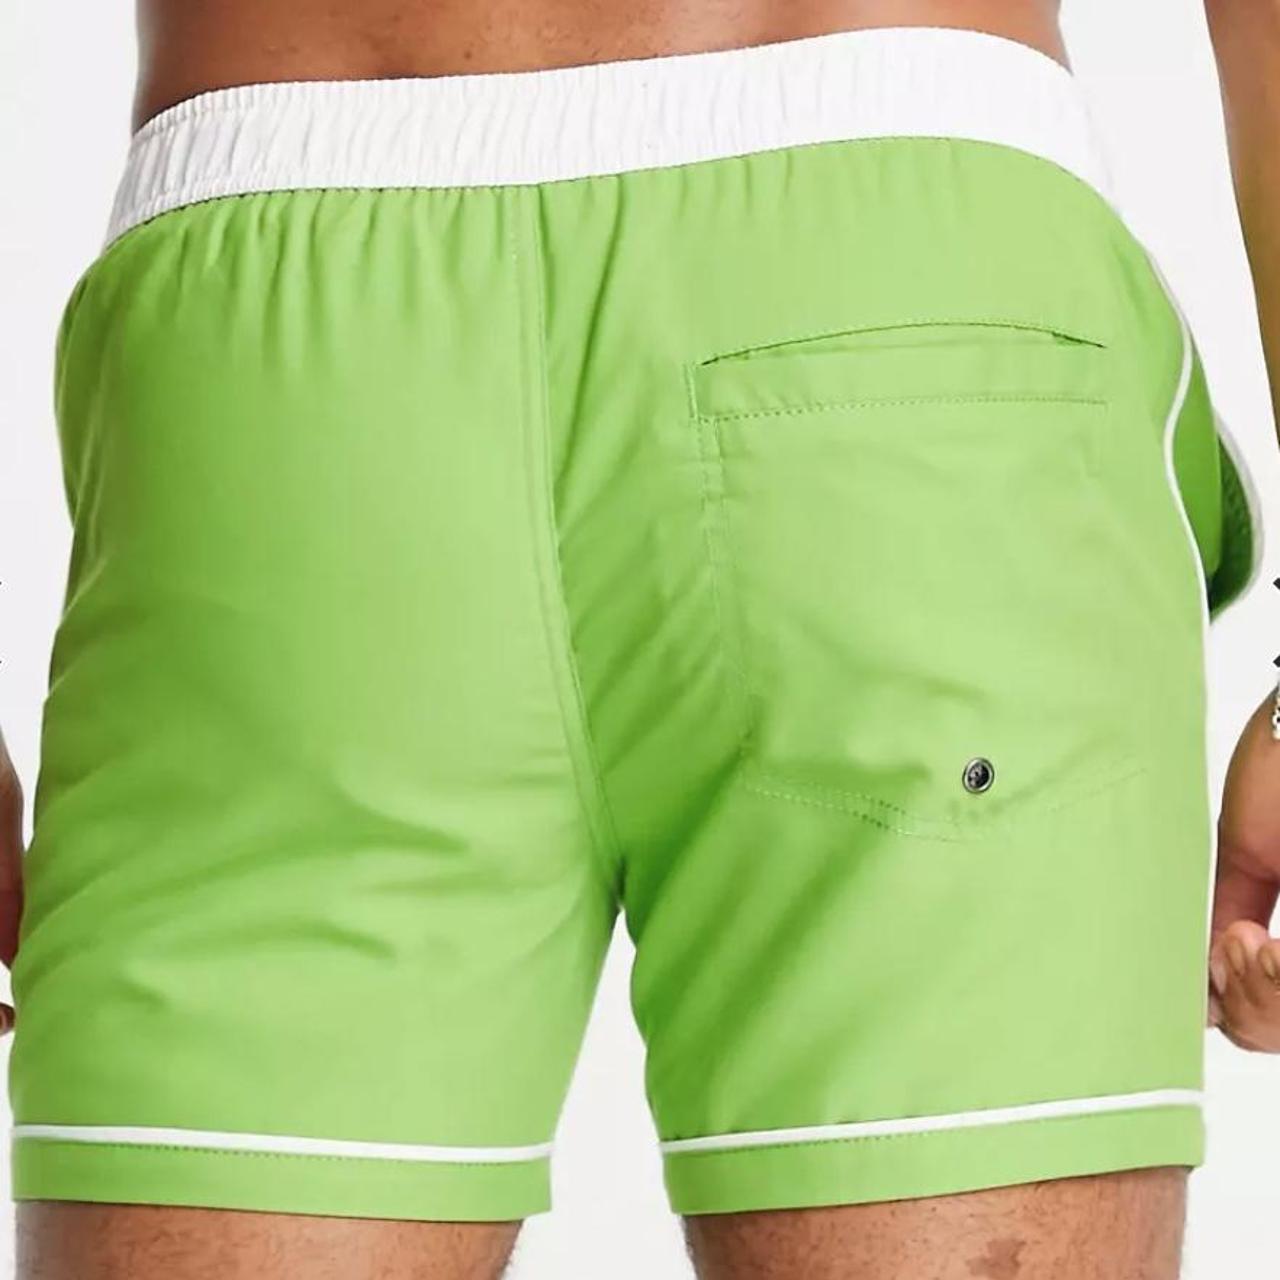 Native Youth Men's Green and White Swim-briefs-shorts (2)